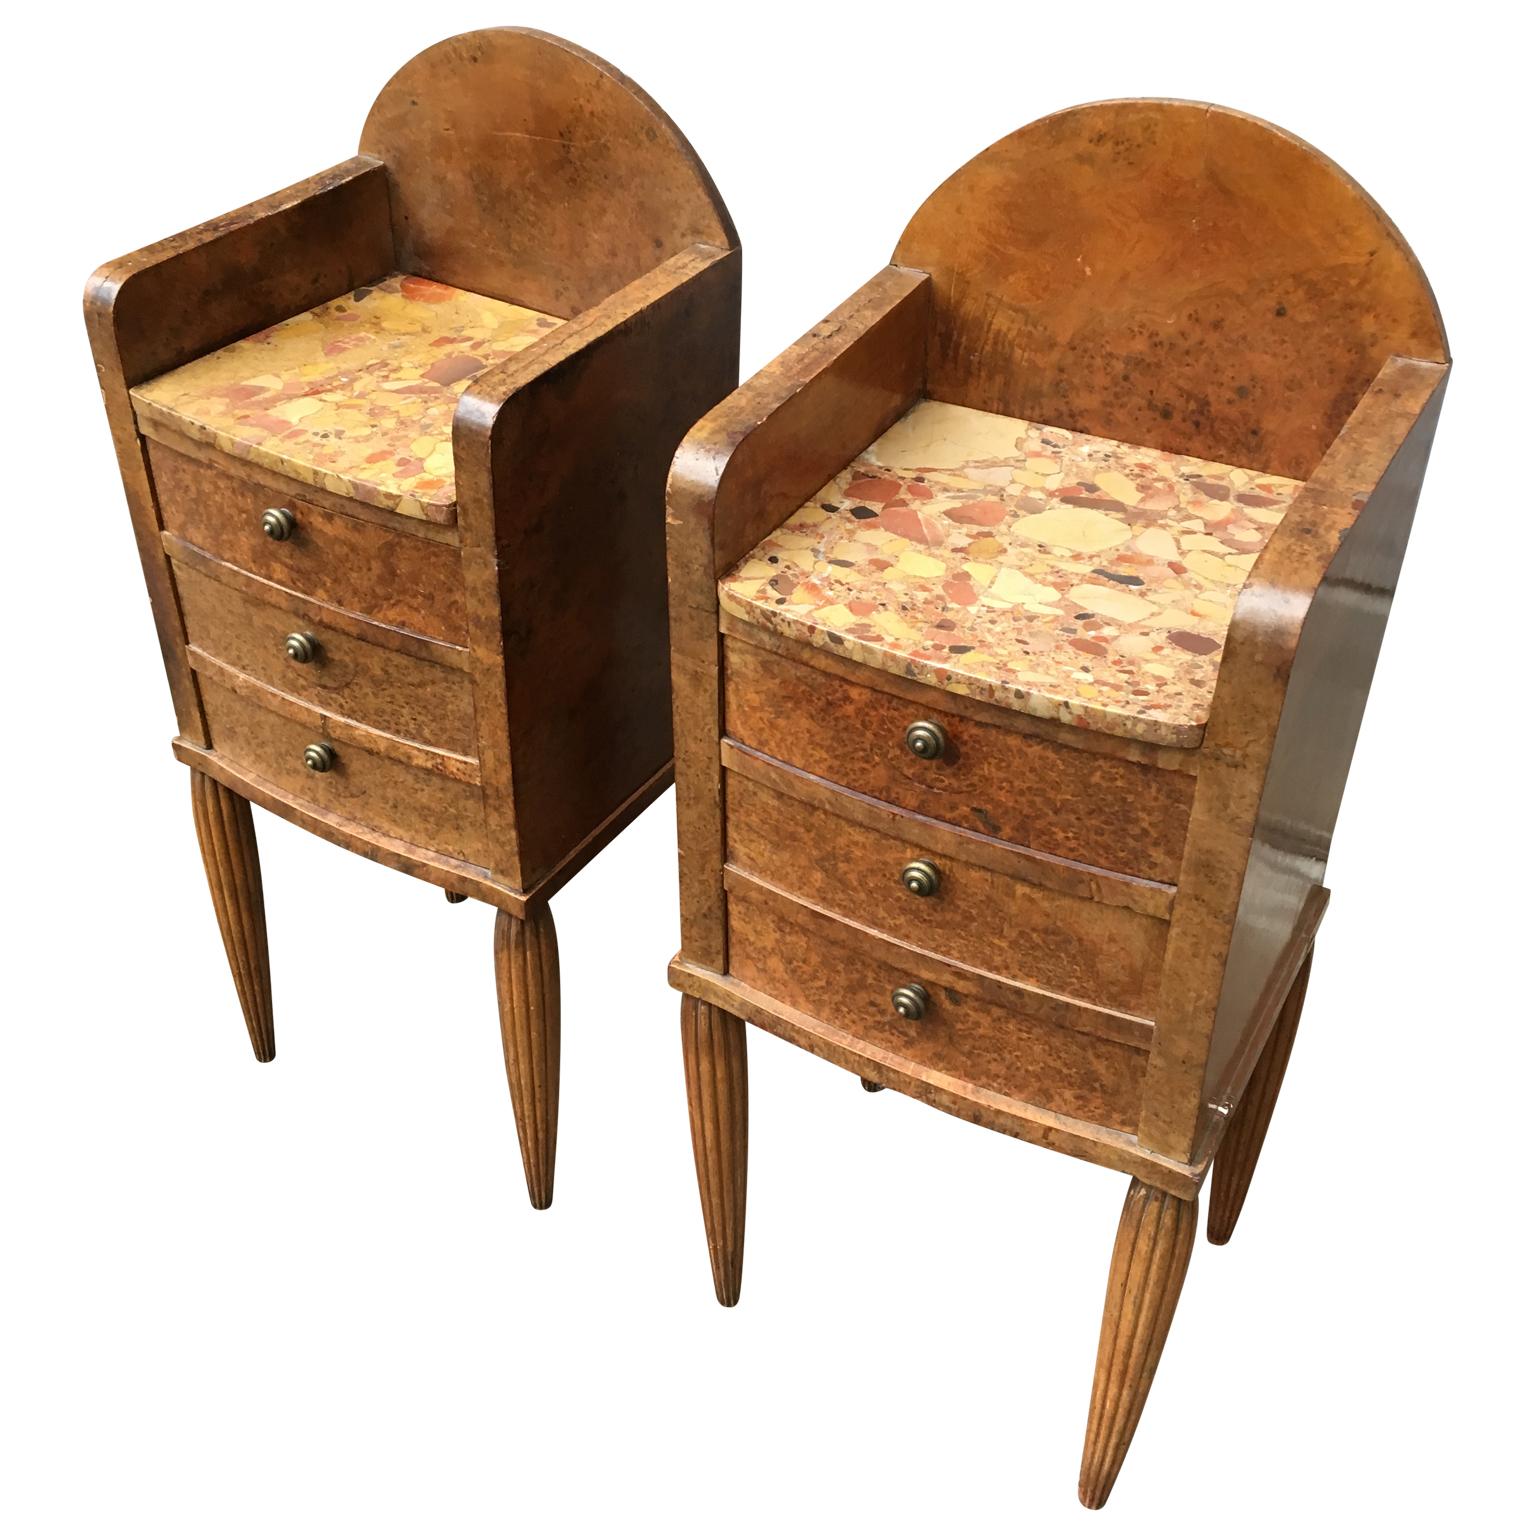 20th Century Pair Of French Art Deco Marble-Top And Burlwood Night Stands For Sale